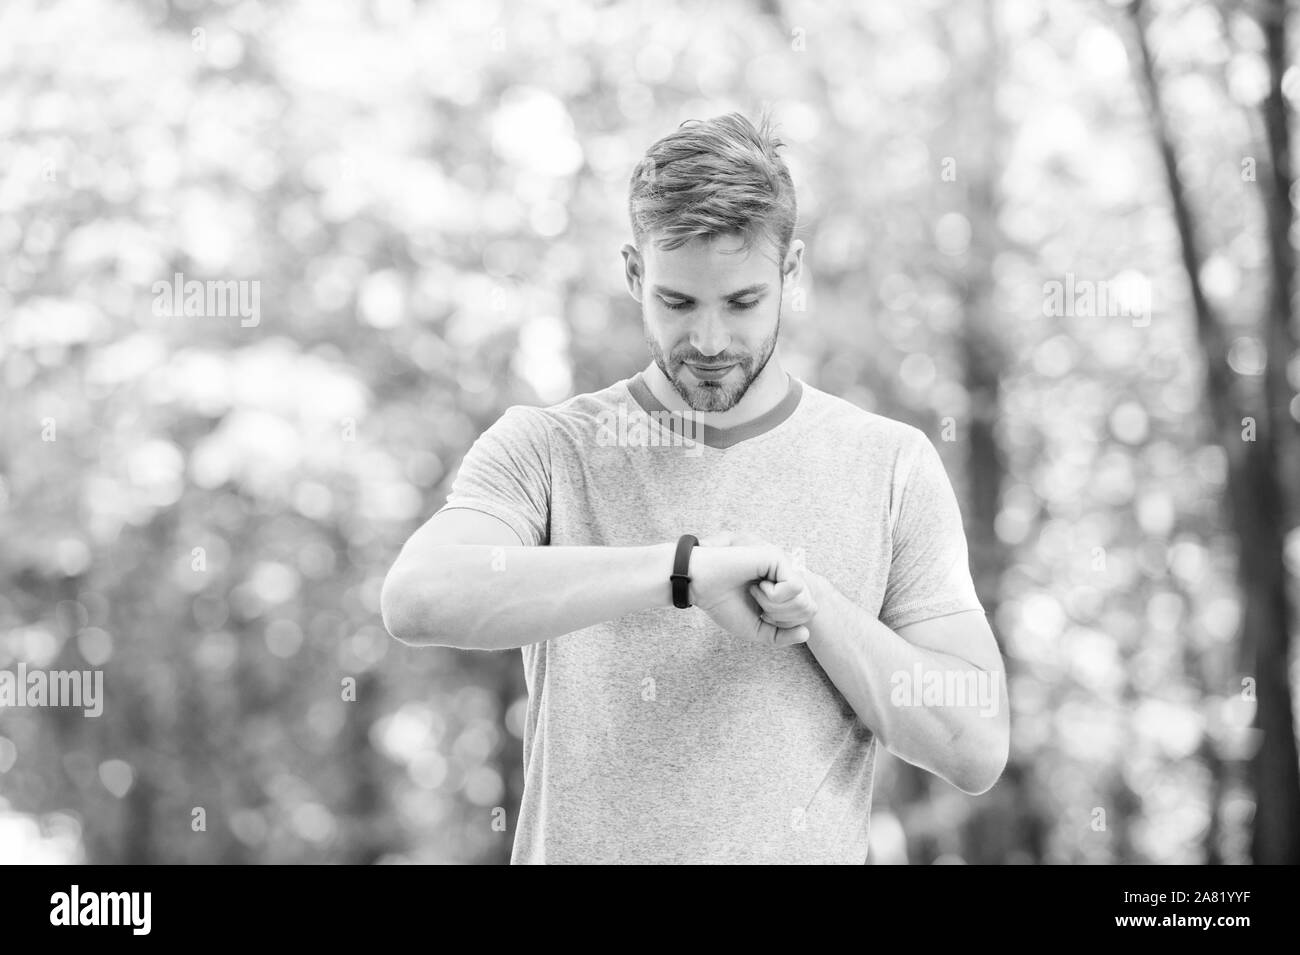 Smart fitness. Fit athlete tracking his fitness activity with sports watch. Handsome athlete using fitness tracker during training outdoor. Monitoring his health with the best fitness device. Stock Photo